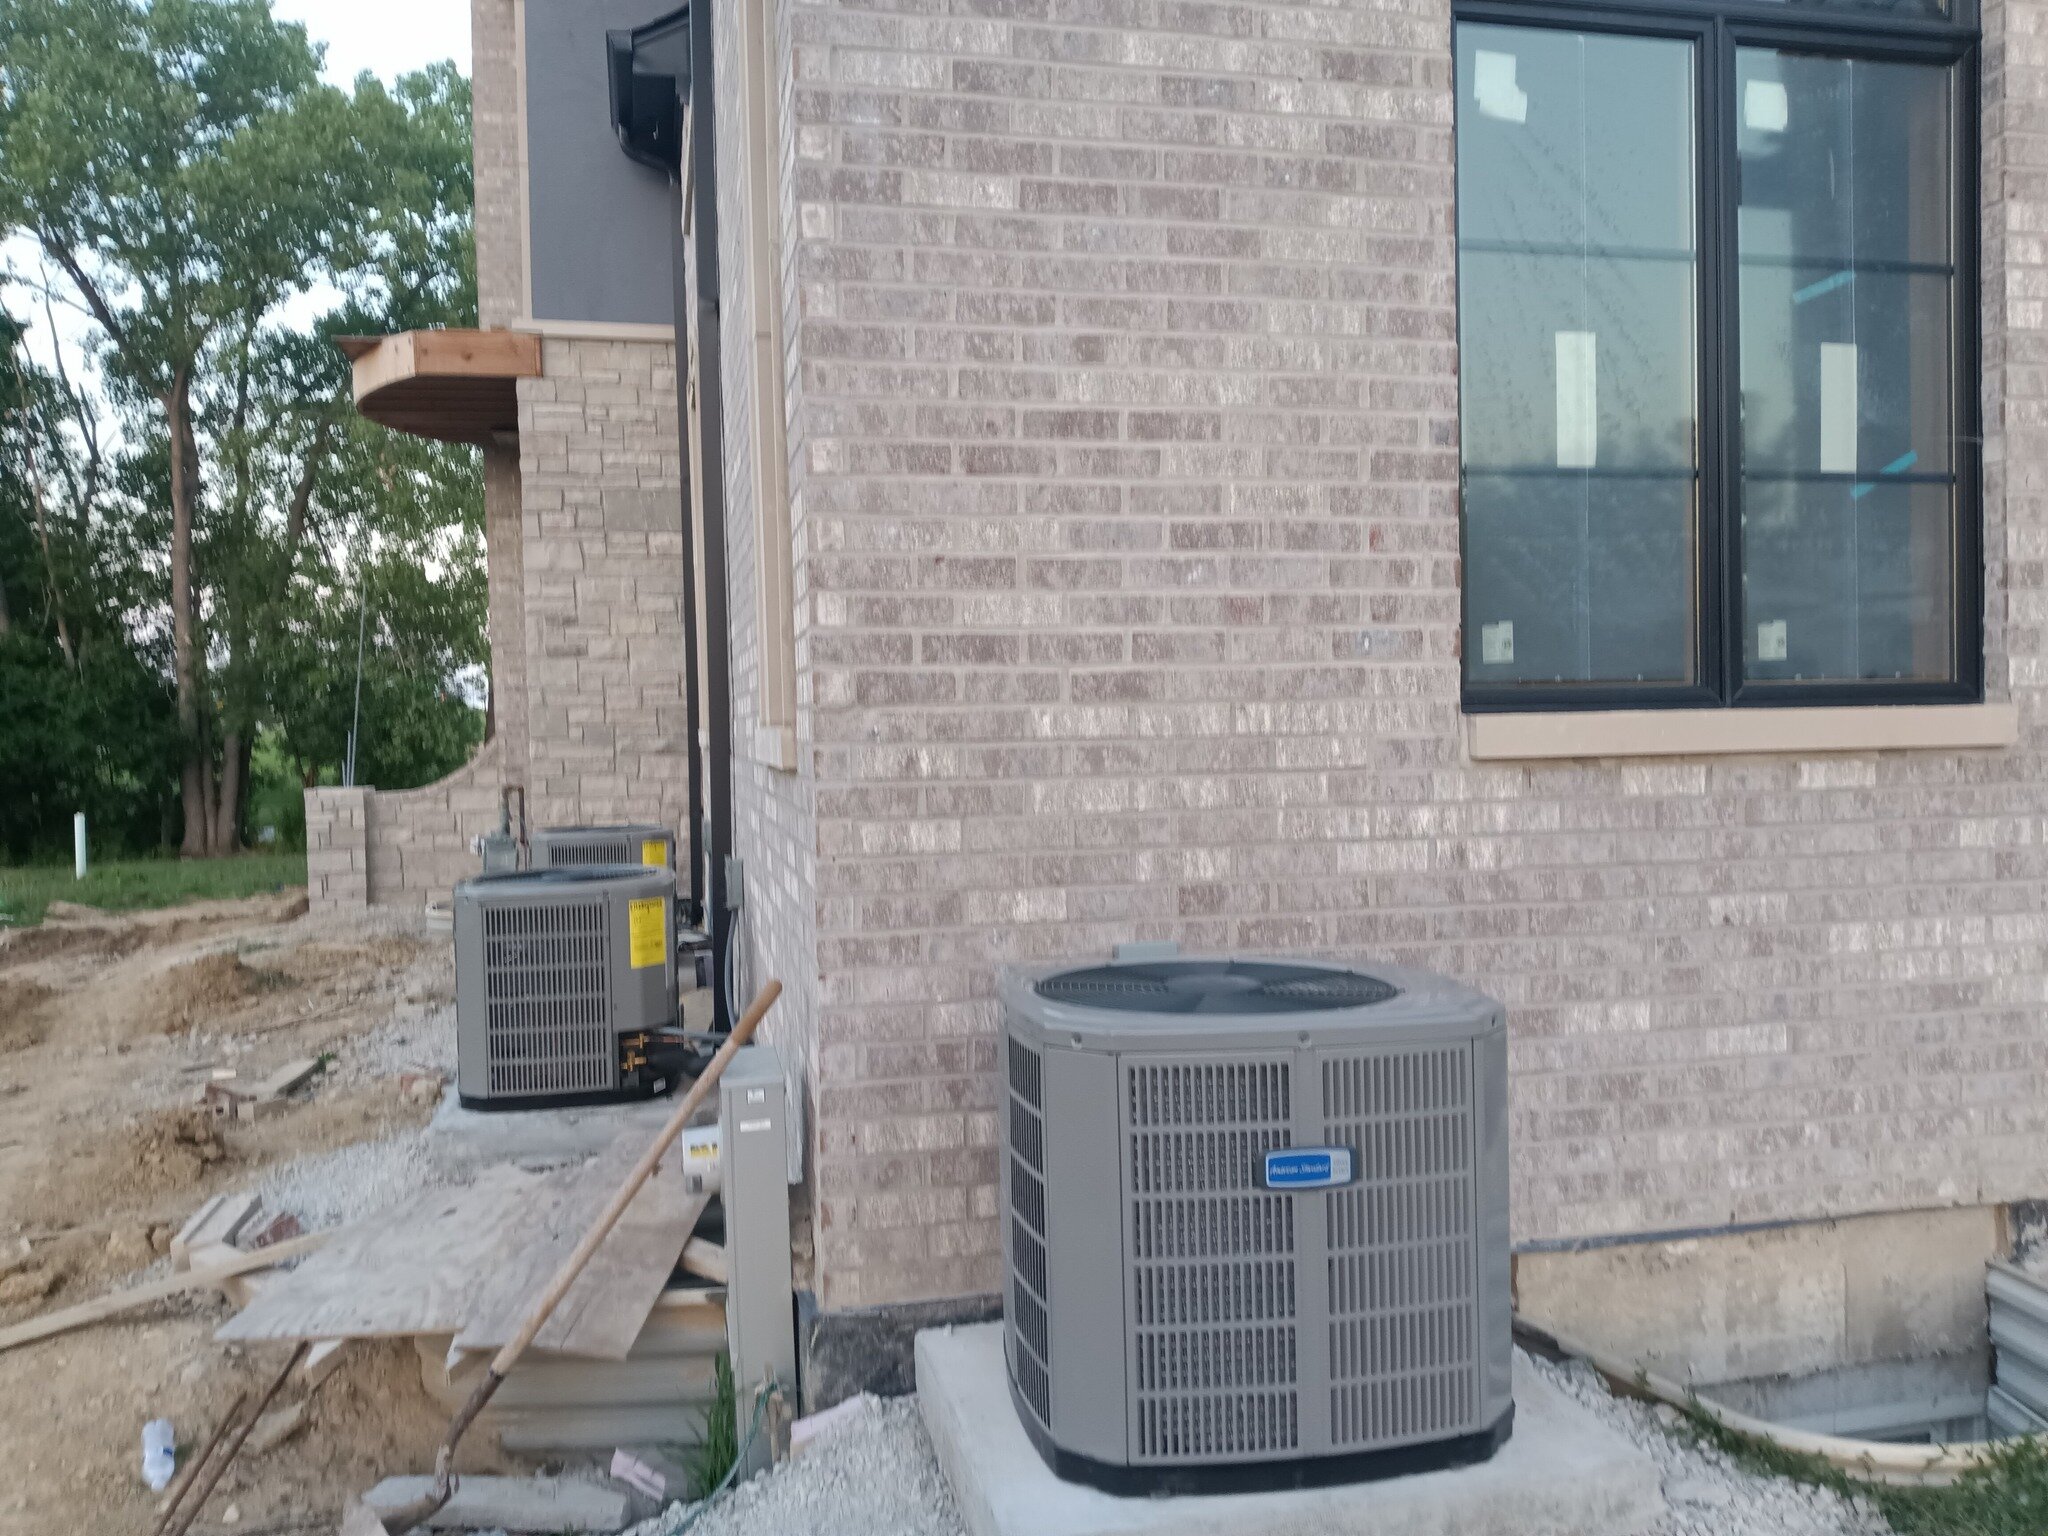 New condenser installation for our residential customer! ✅

The American Standard Silver 13 is a good value investment for your home. It cools efficiently and circulates air well throughout your home. Design touches make it a durable unit that will l